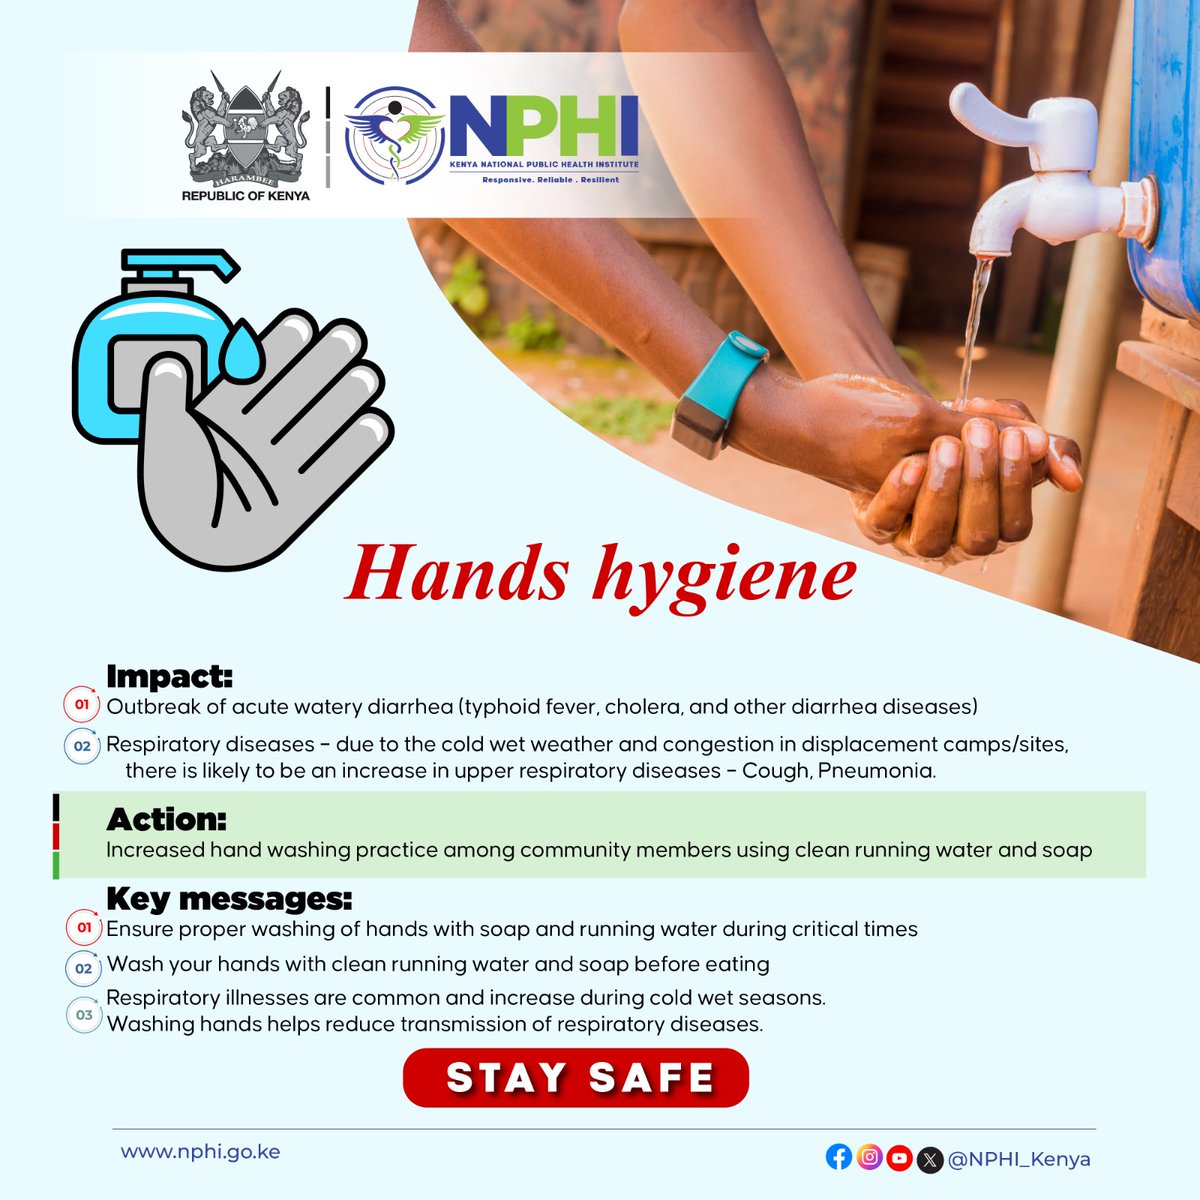 Sanitation practices promoted by public health initiatives help prevent the spread of infectious diseases in communities. #PublicHealth SafetyForAll